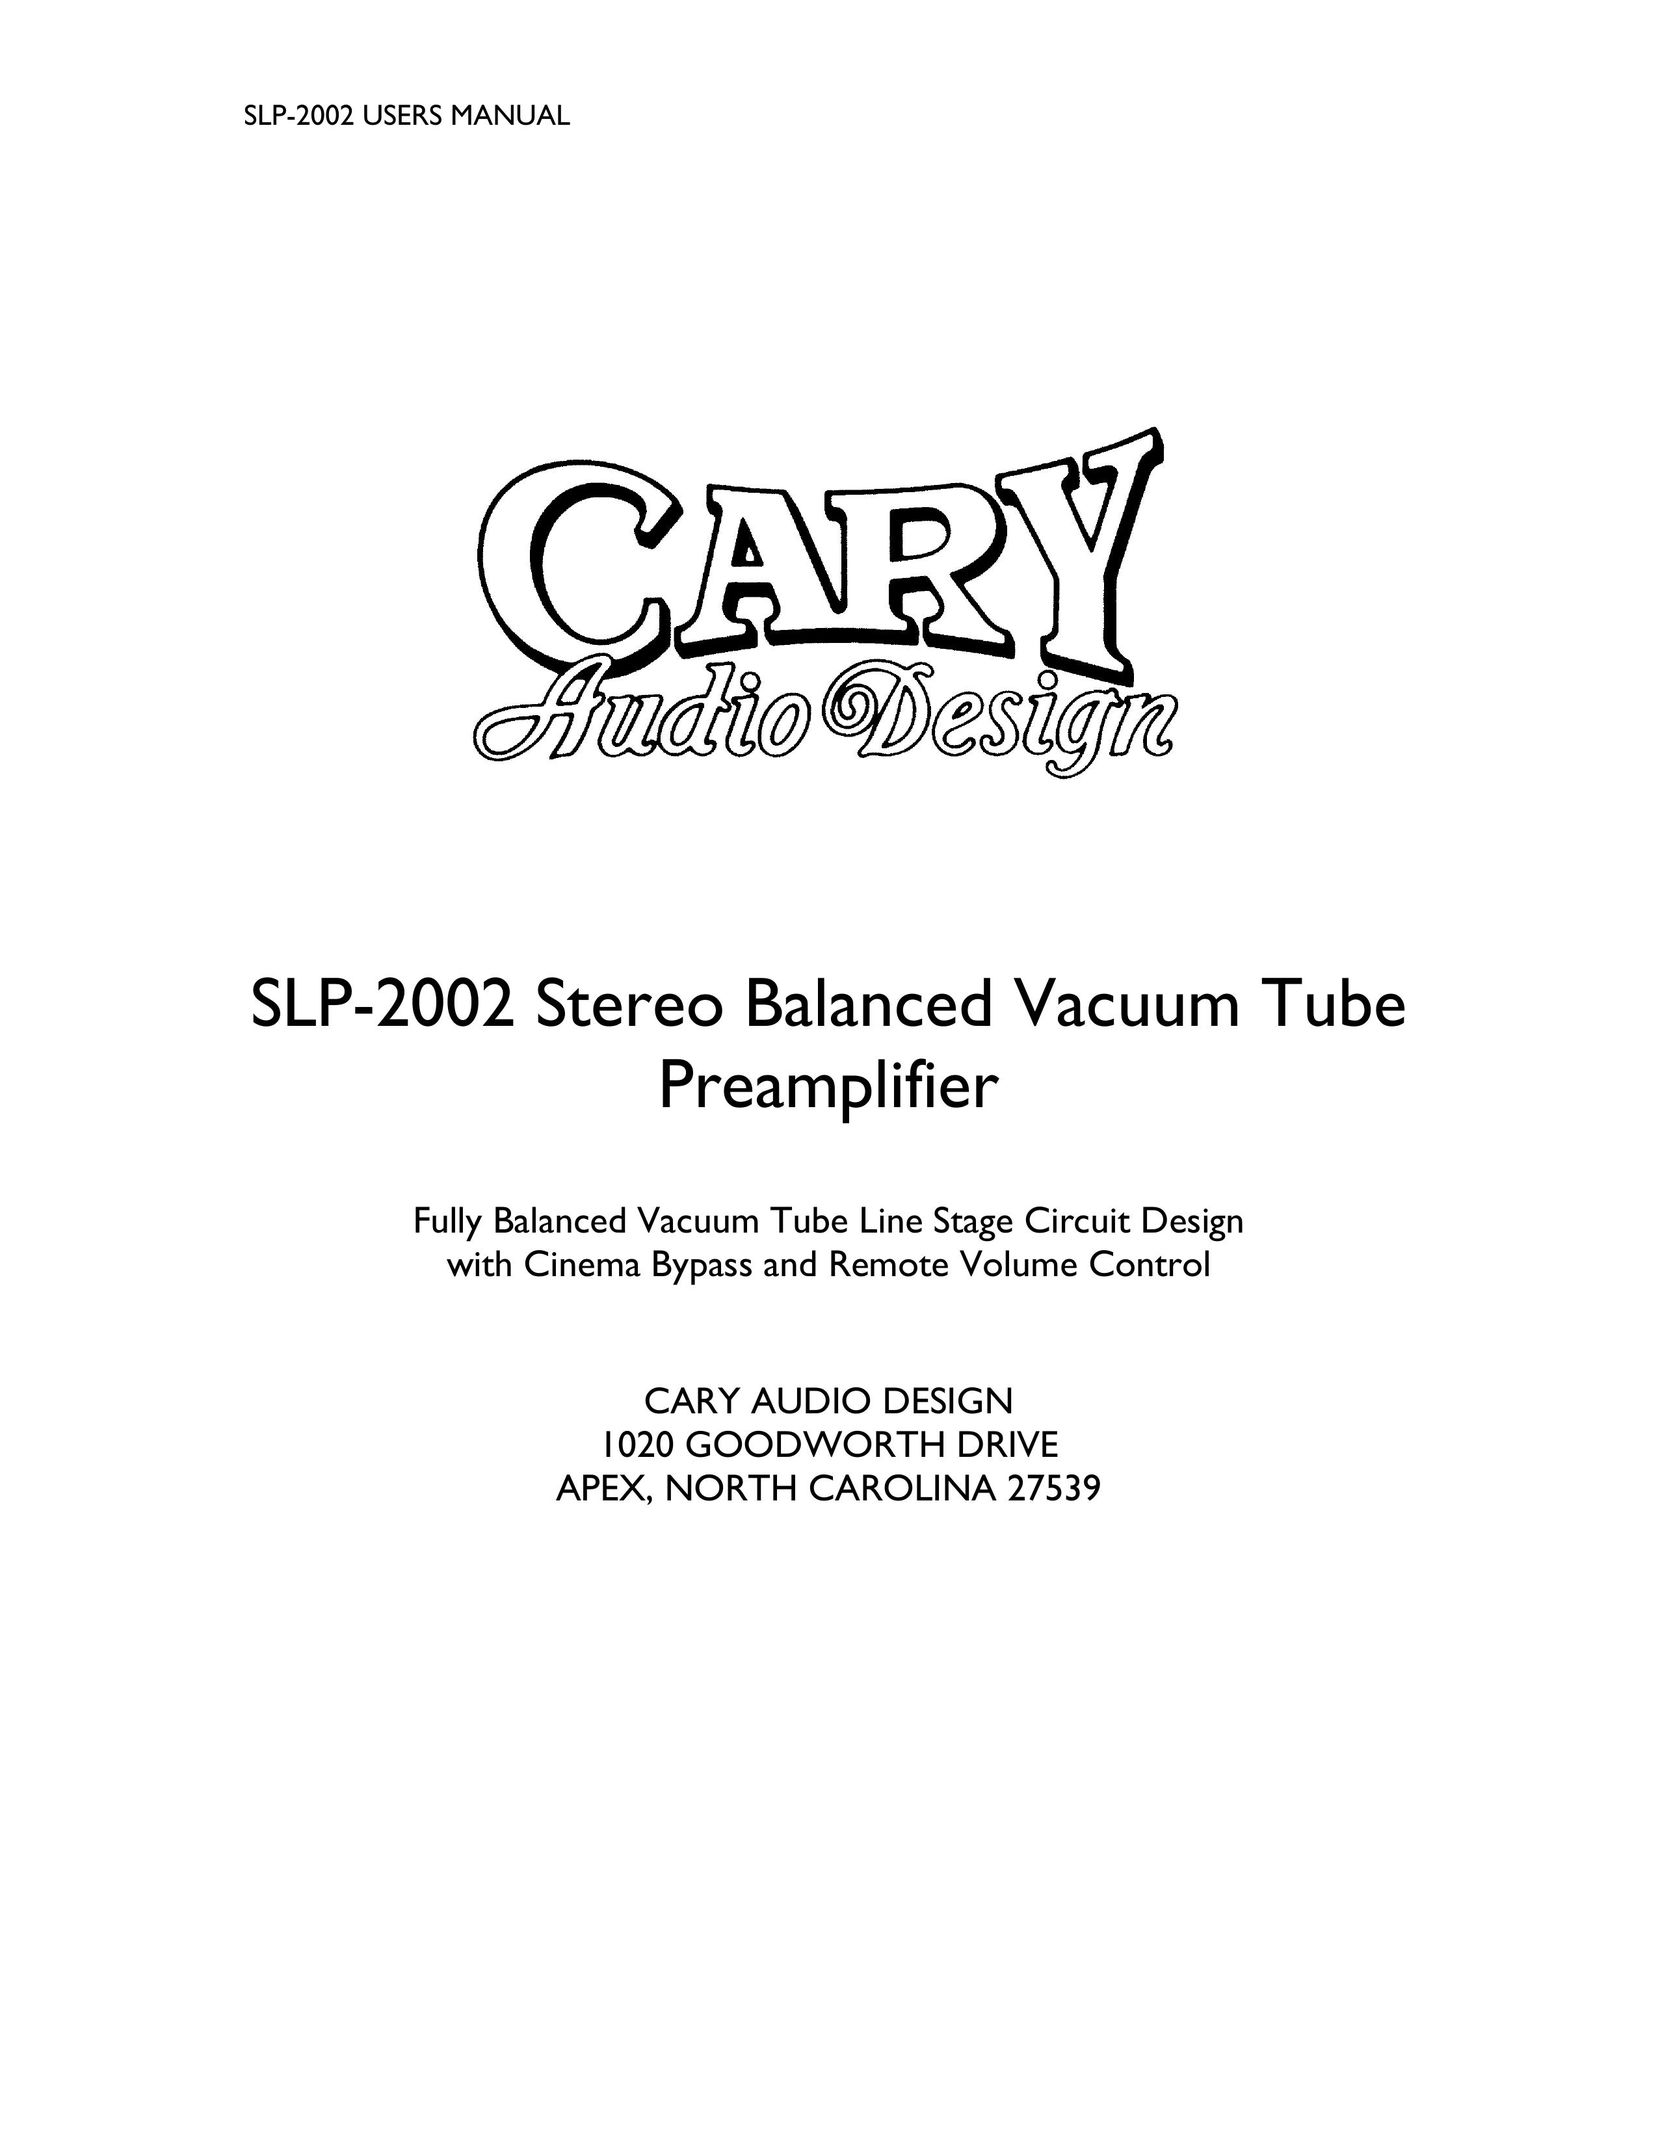 Cary Audio Design SLP-2002 Stereo Amplifier User Manual